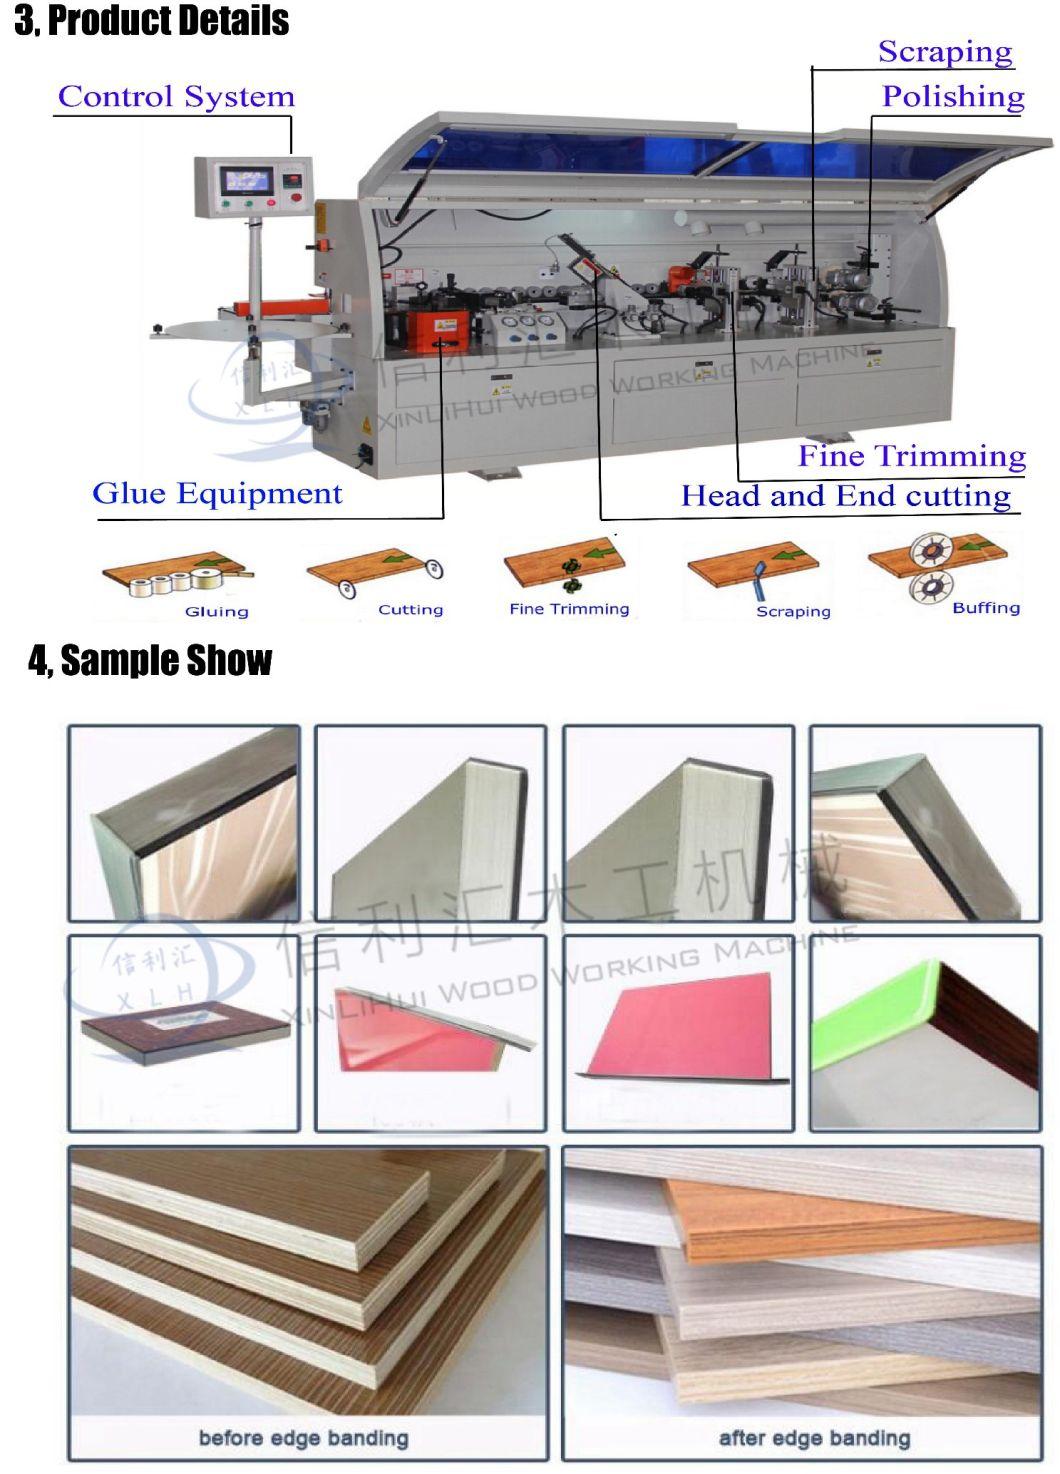 Chinese Manufacture Fine Finishing Wood Machine Woodworking Tool of Edge Banding Machine with Heating Press for PVC, Wood Veneer, Wood Grained Paper